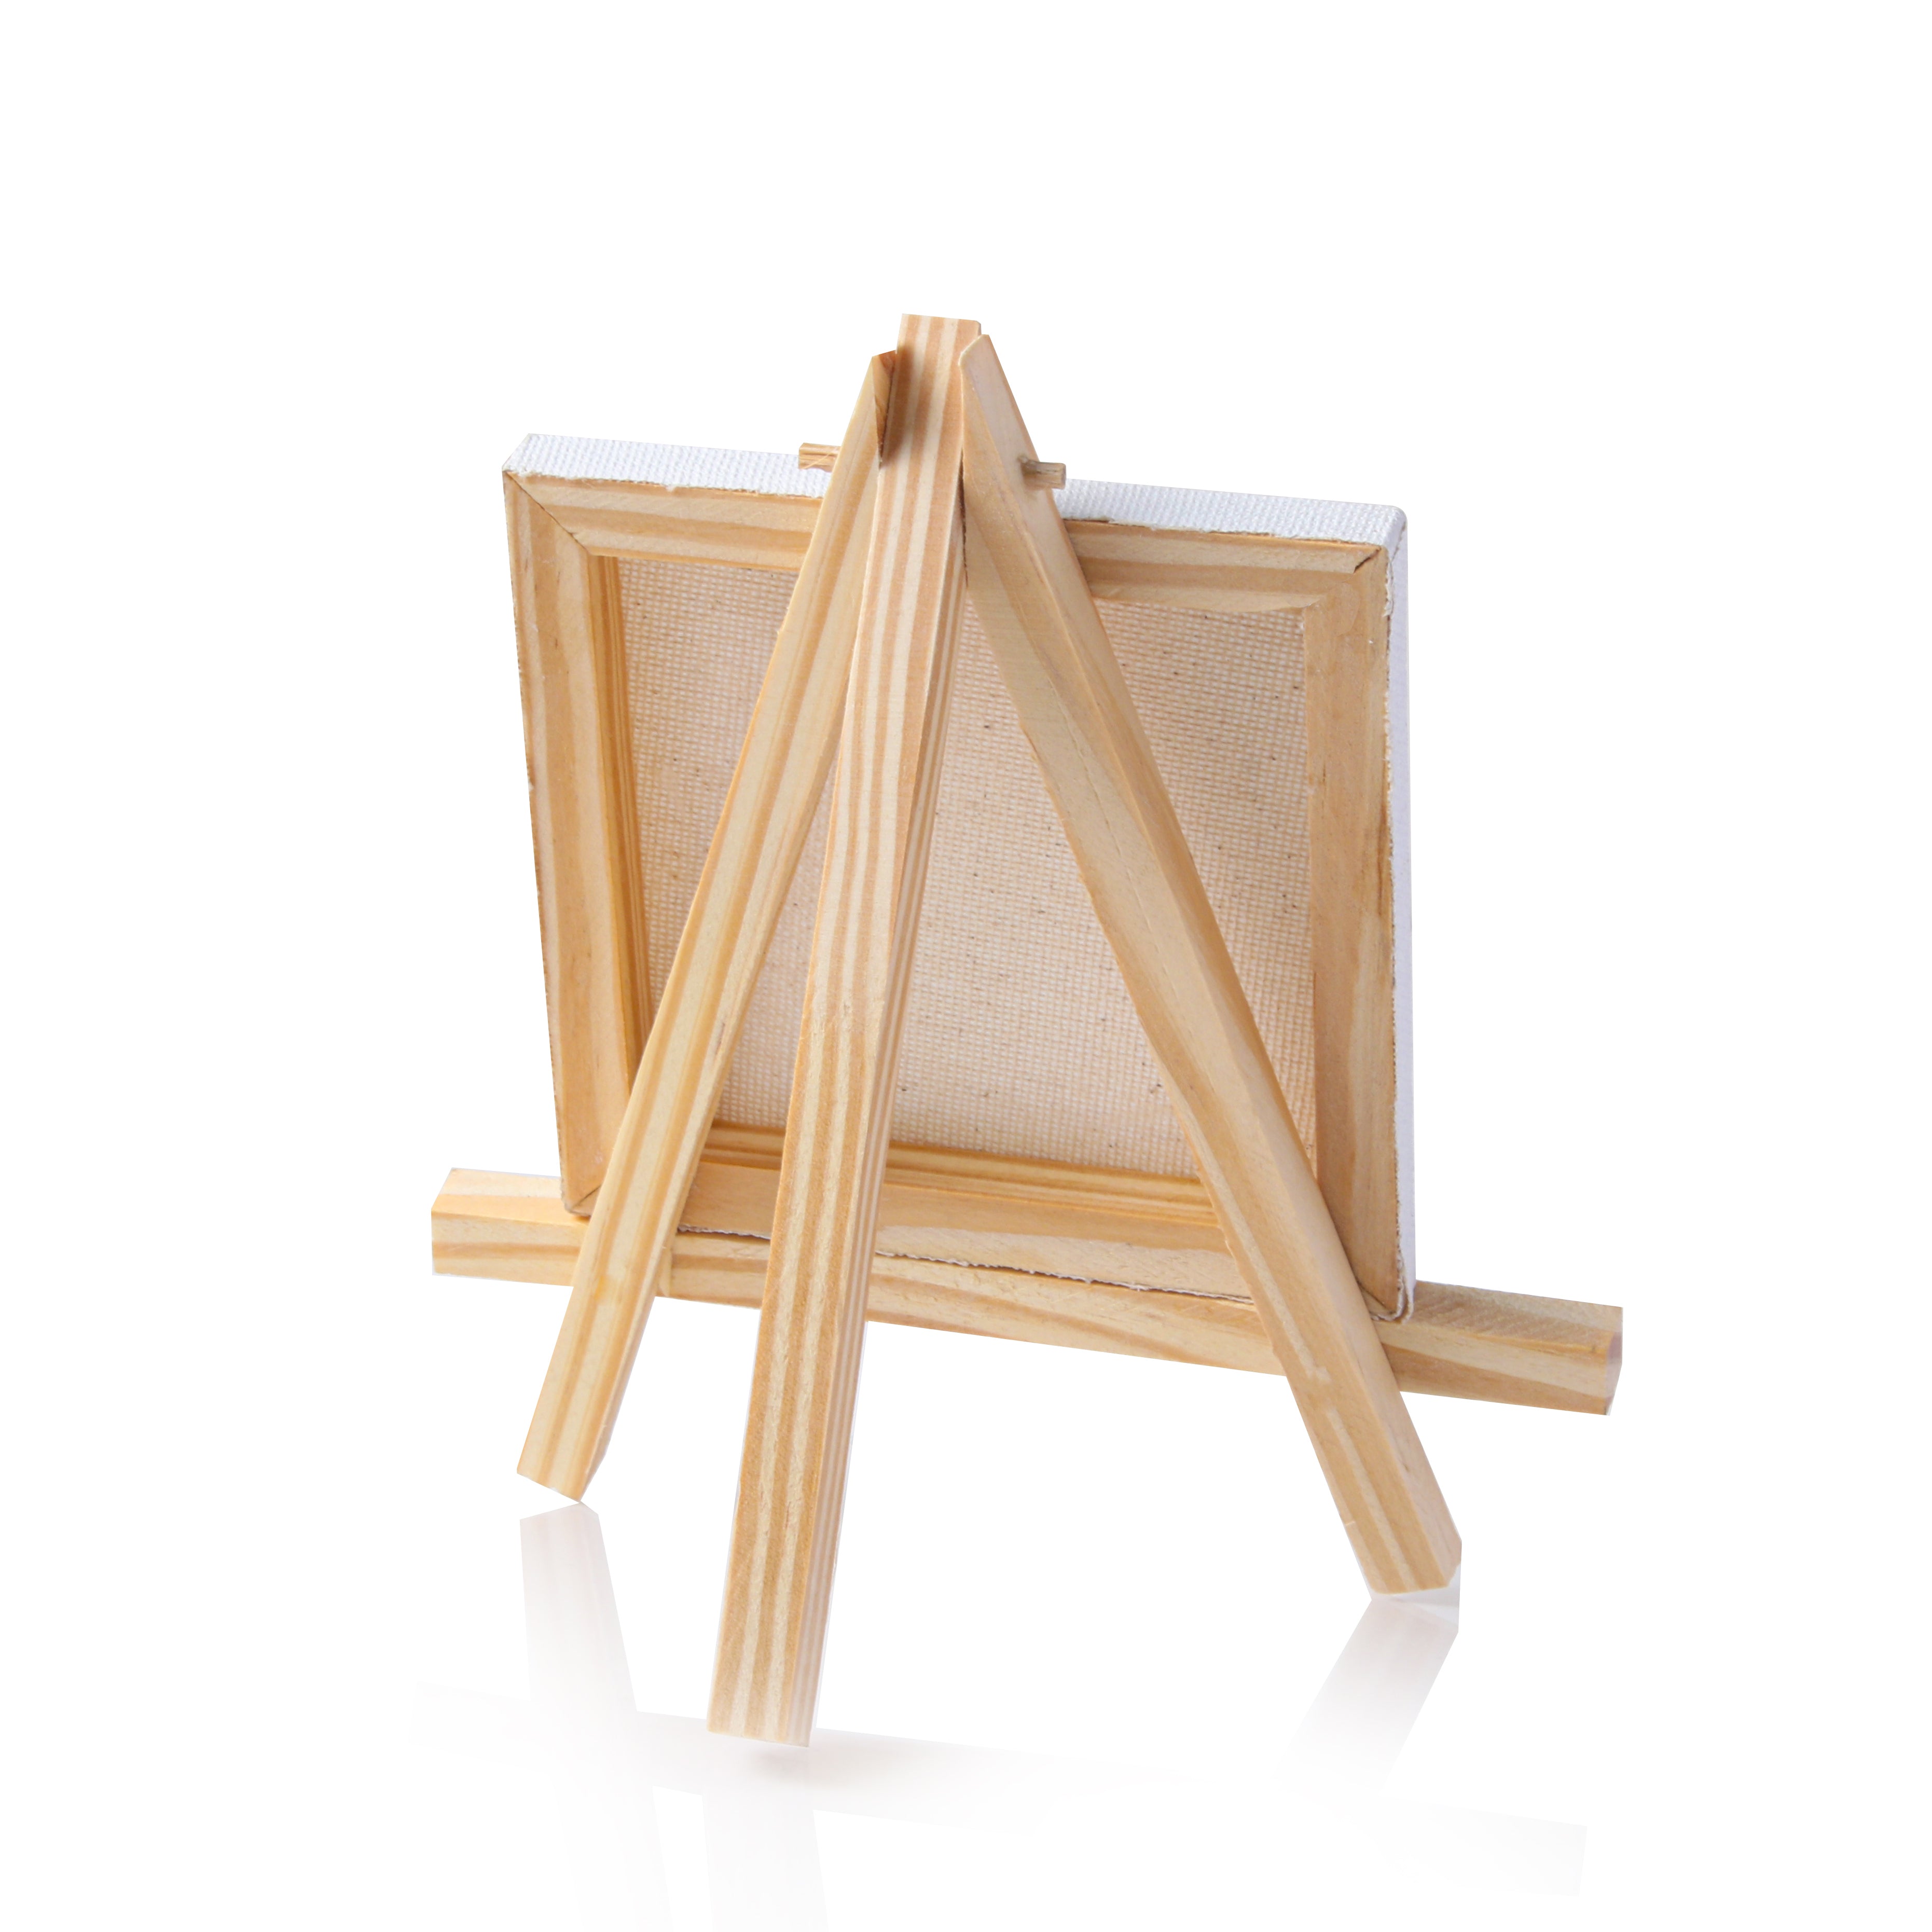 Wooden Mini Easel With Canvas Easel Size 15Cm & Canvas Size 10 X 10Cm Set Of 2Pc